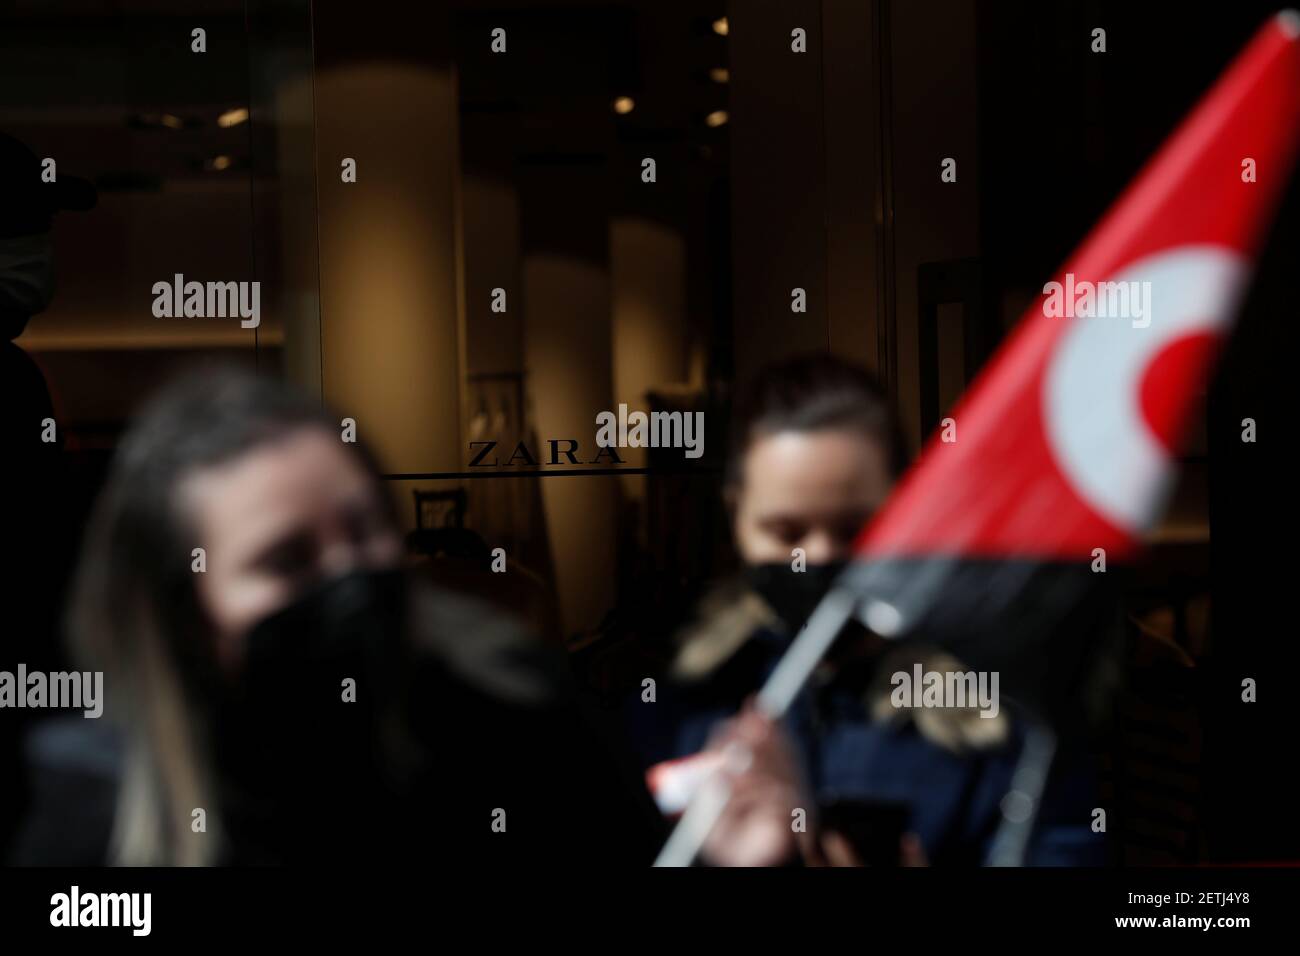 People hold flags from Spain's CGT labour union as they protest outside a  Zara clothing store, an Inditex brand, in Madrid, Spain, February 25, 2021.  REUTERS/Susana Vera Stock Photo - Alamy